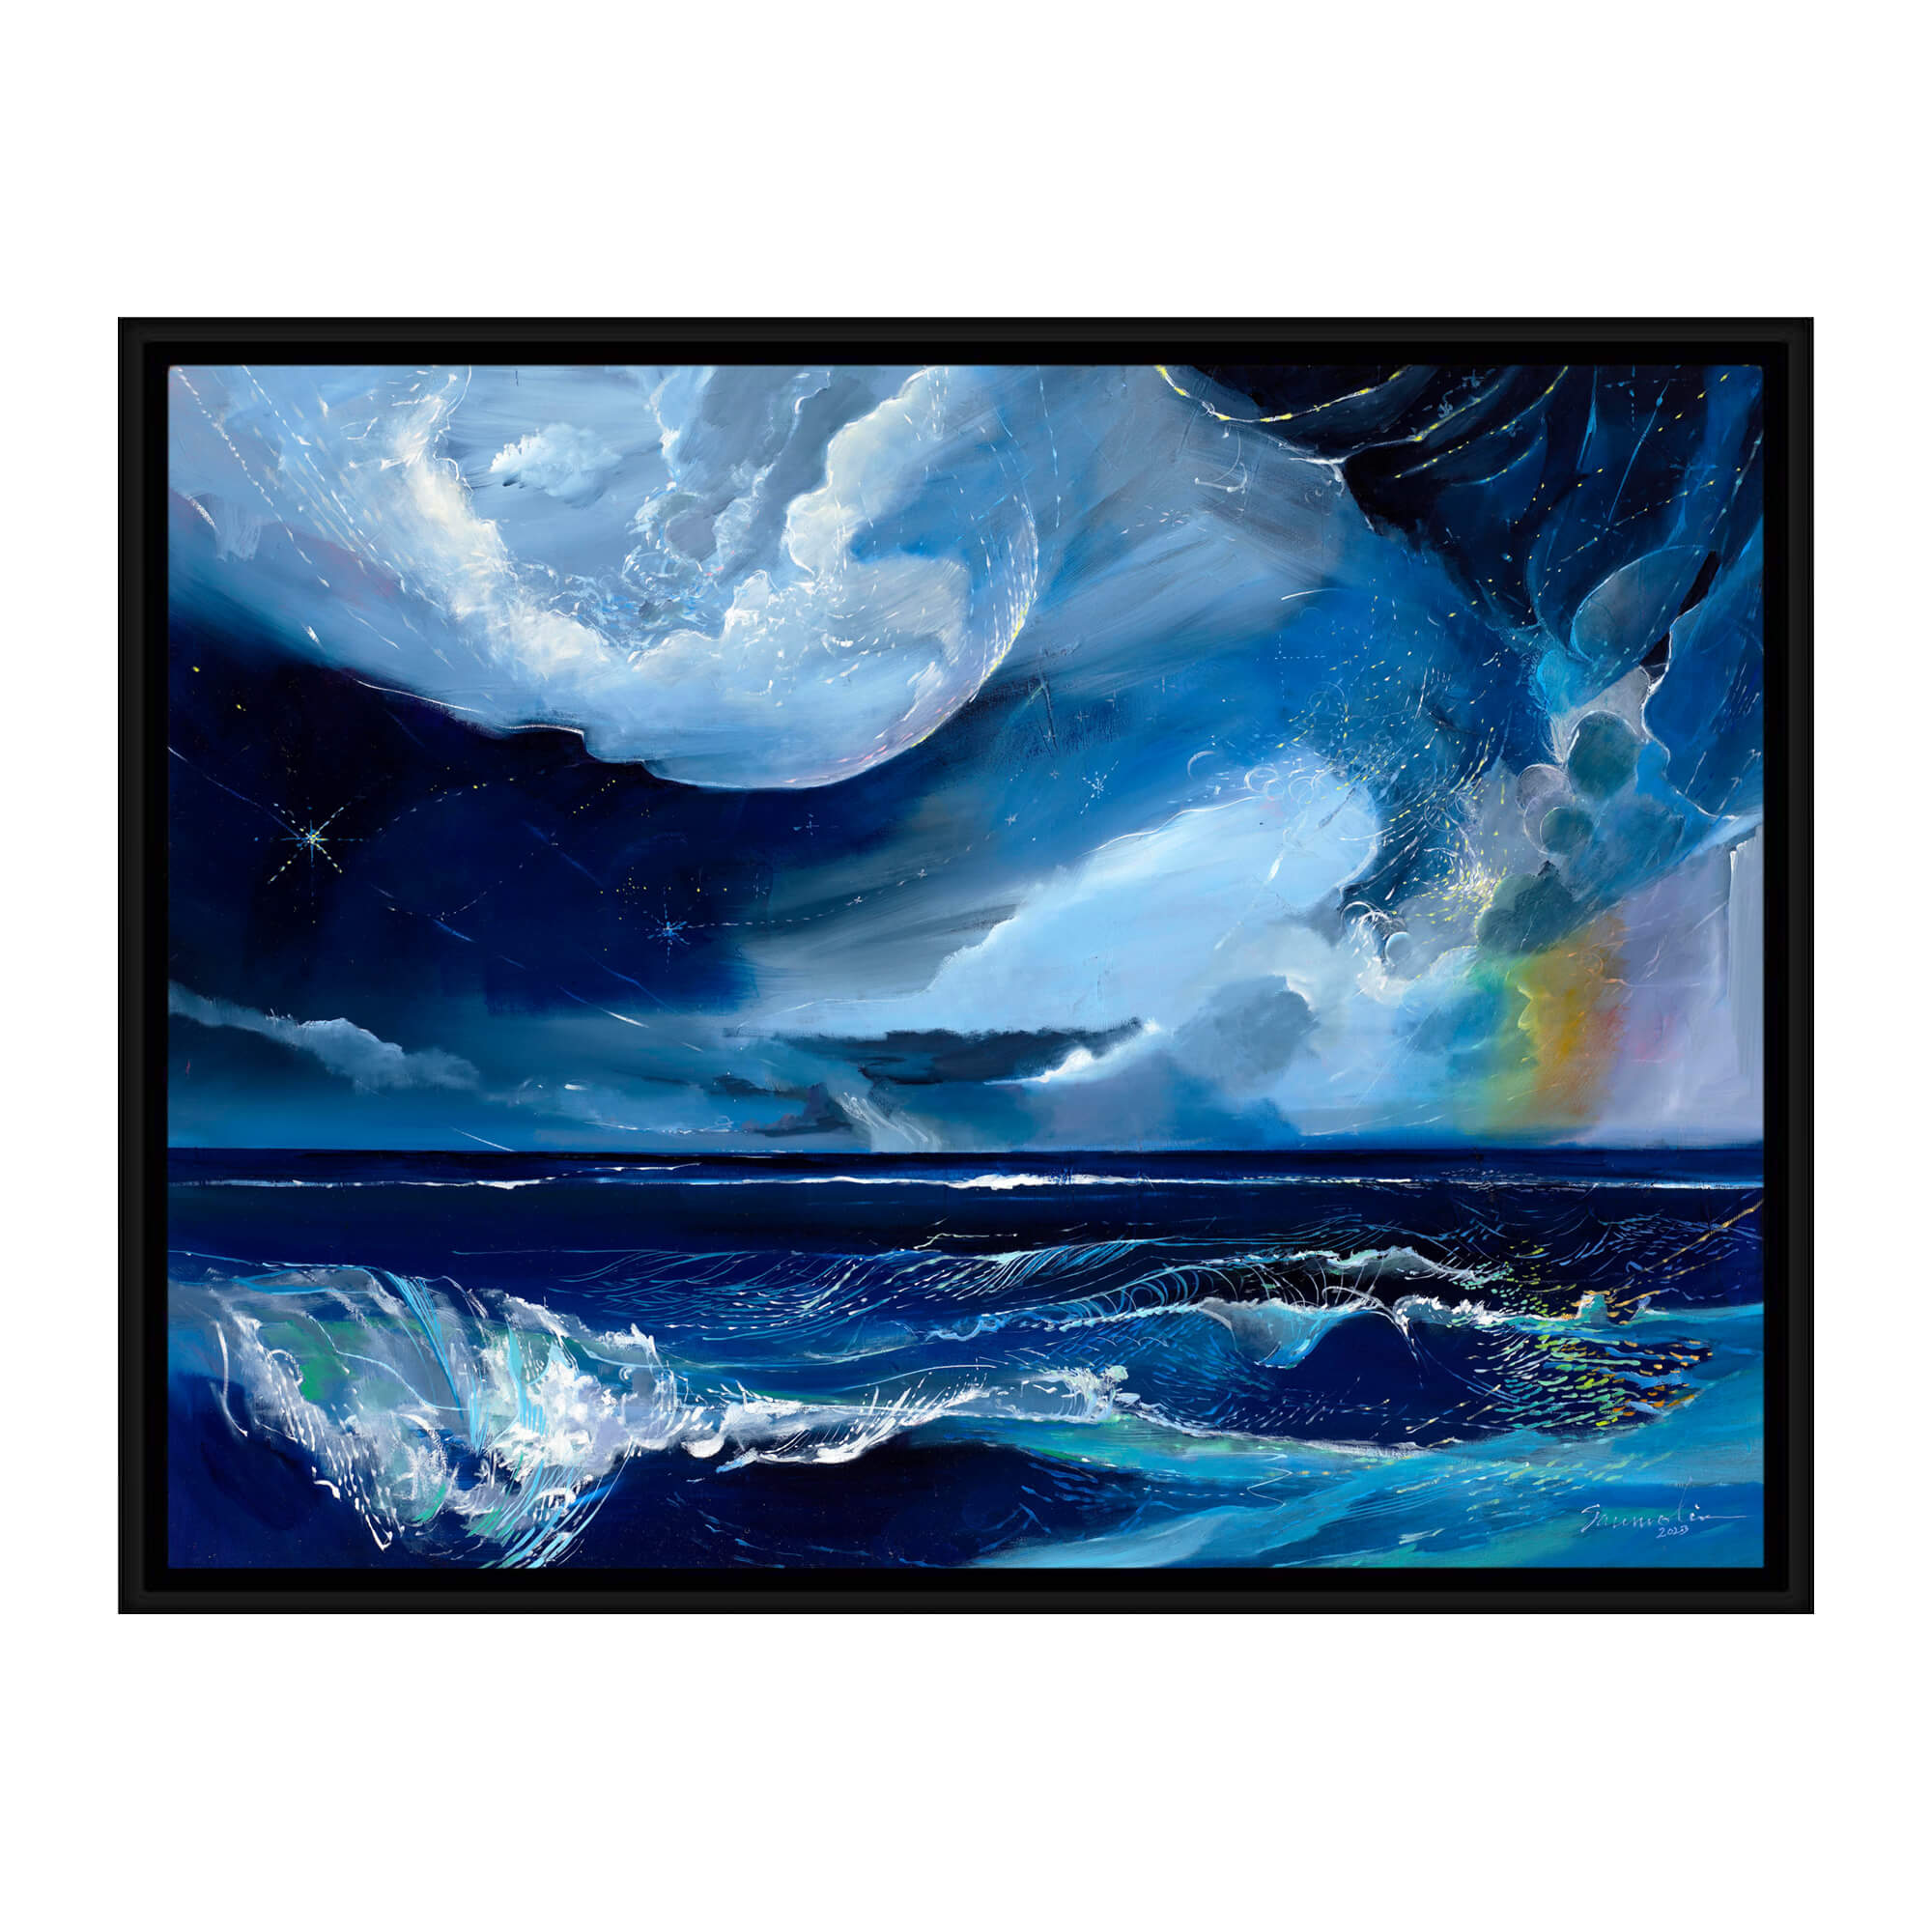 Beautiful evening abstract painting of the ocean with stars by Hawaii artist Saumolia Puapuaga